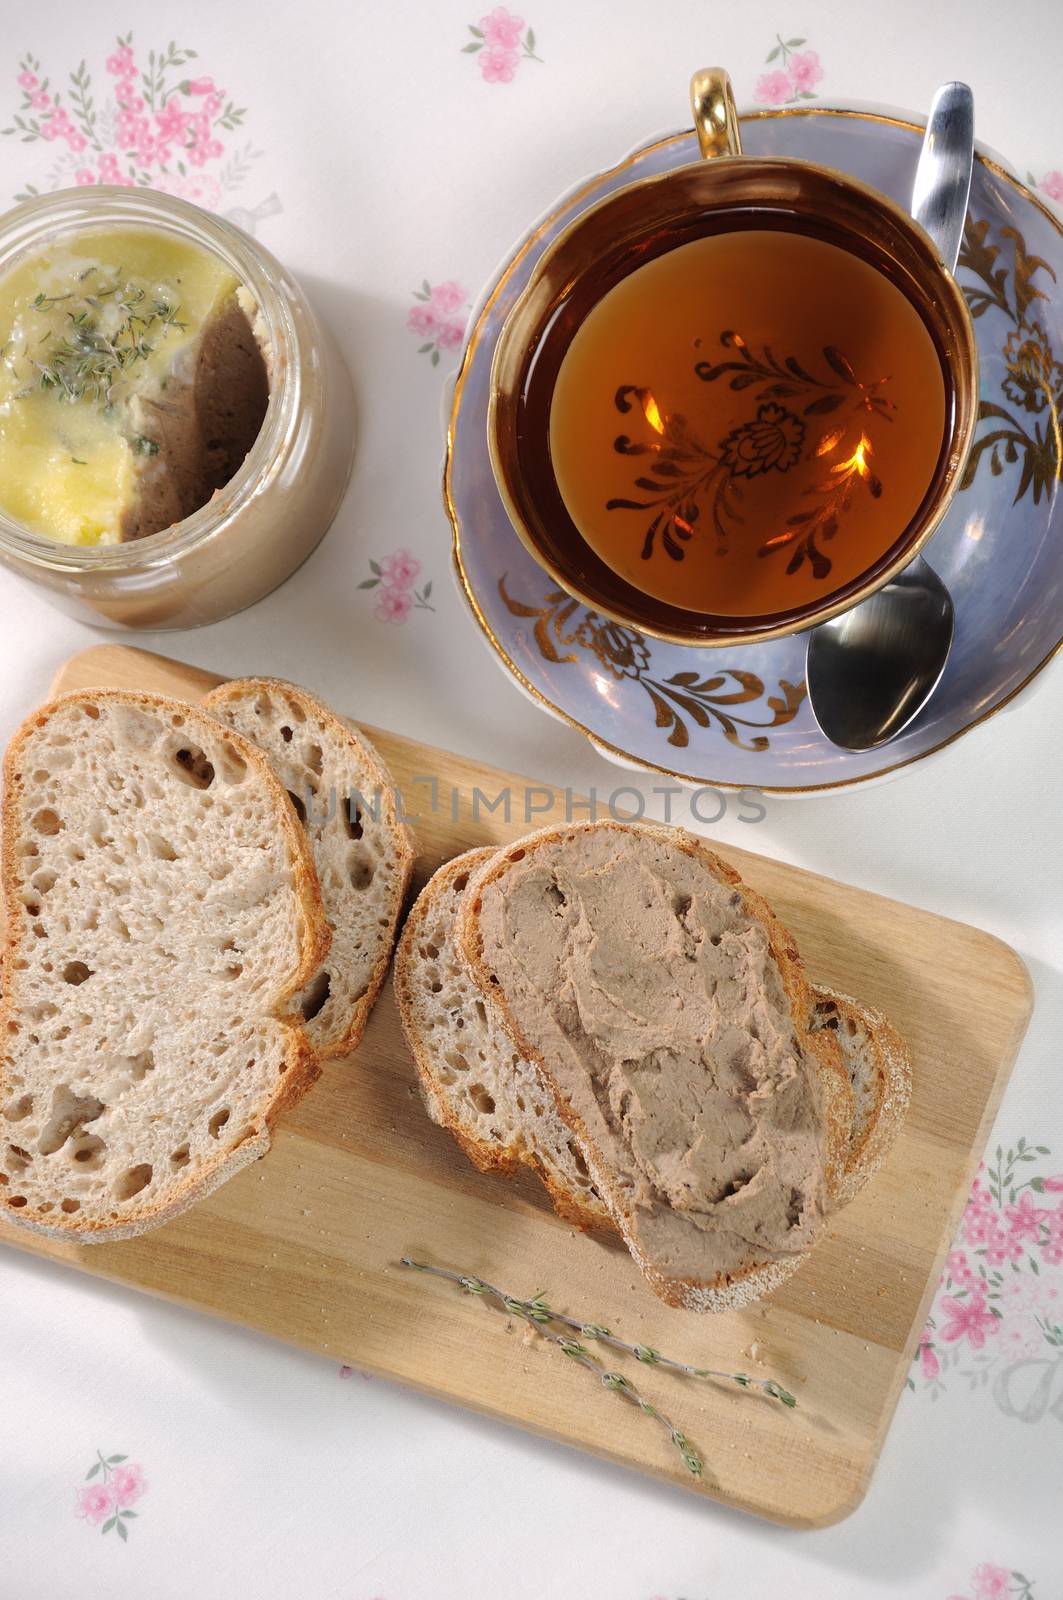 Chicken liver pate on bread and in jar by Apolonia